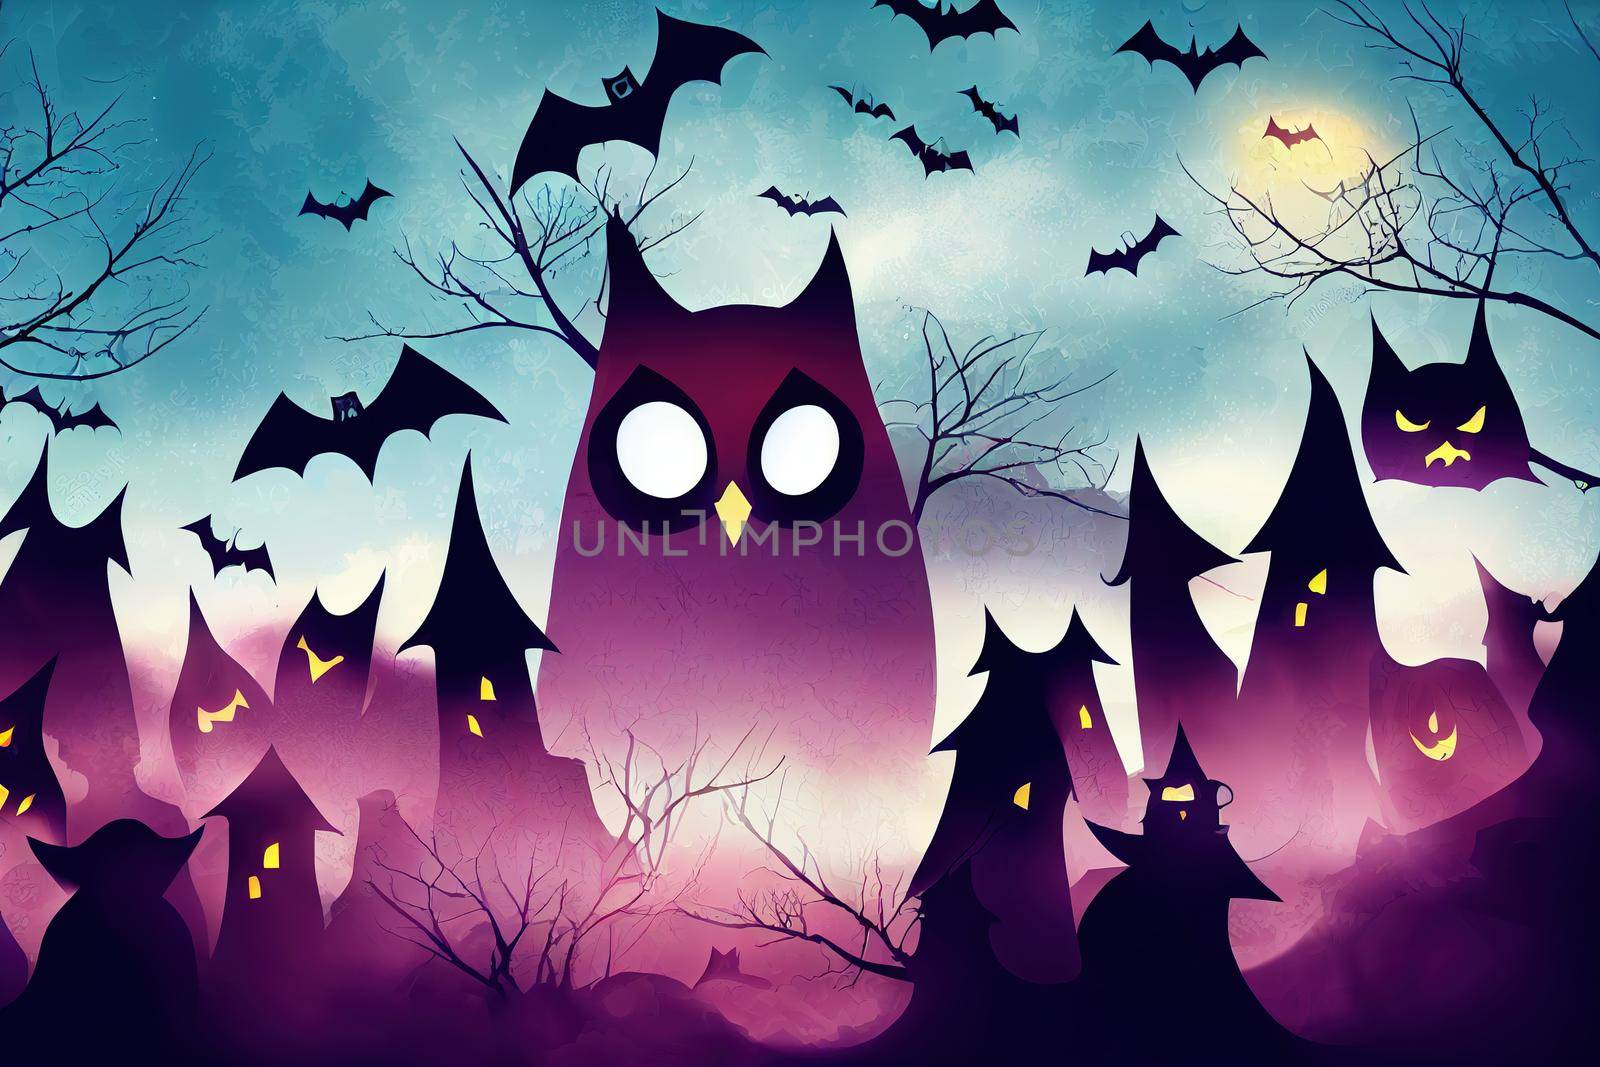 Dark magic light in fog Halloween background with bats and owls by 2ragon